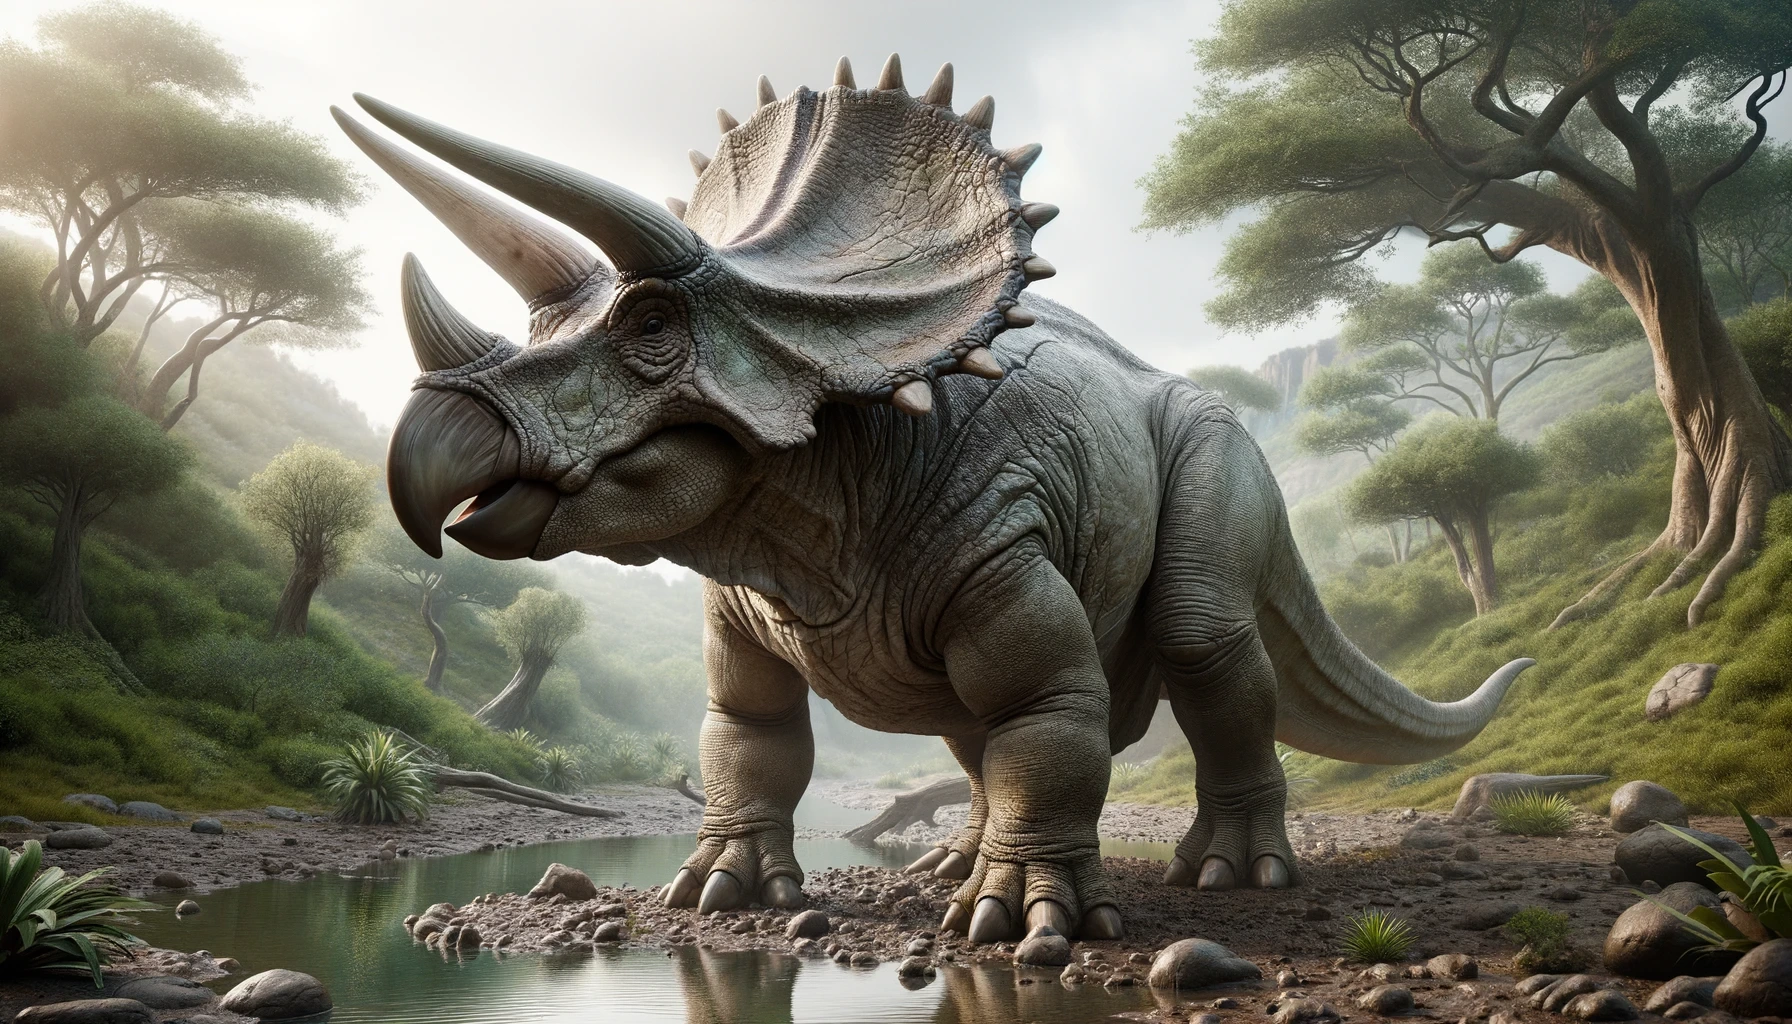 Anchiceratops in coastal plains with distinctive horns and frill.